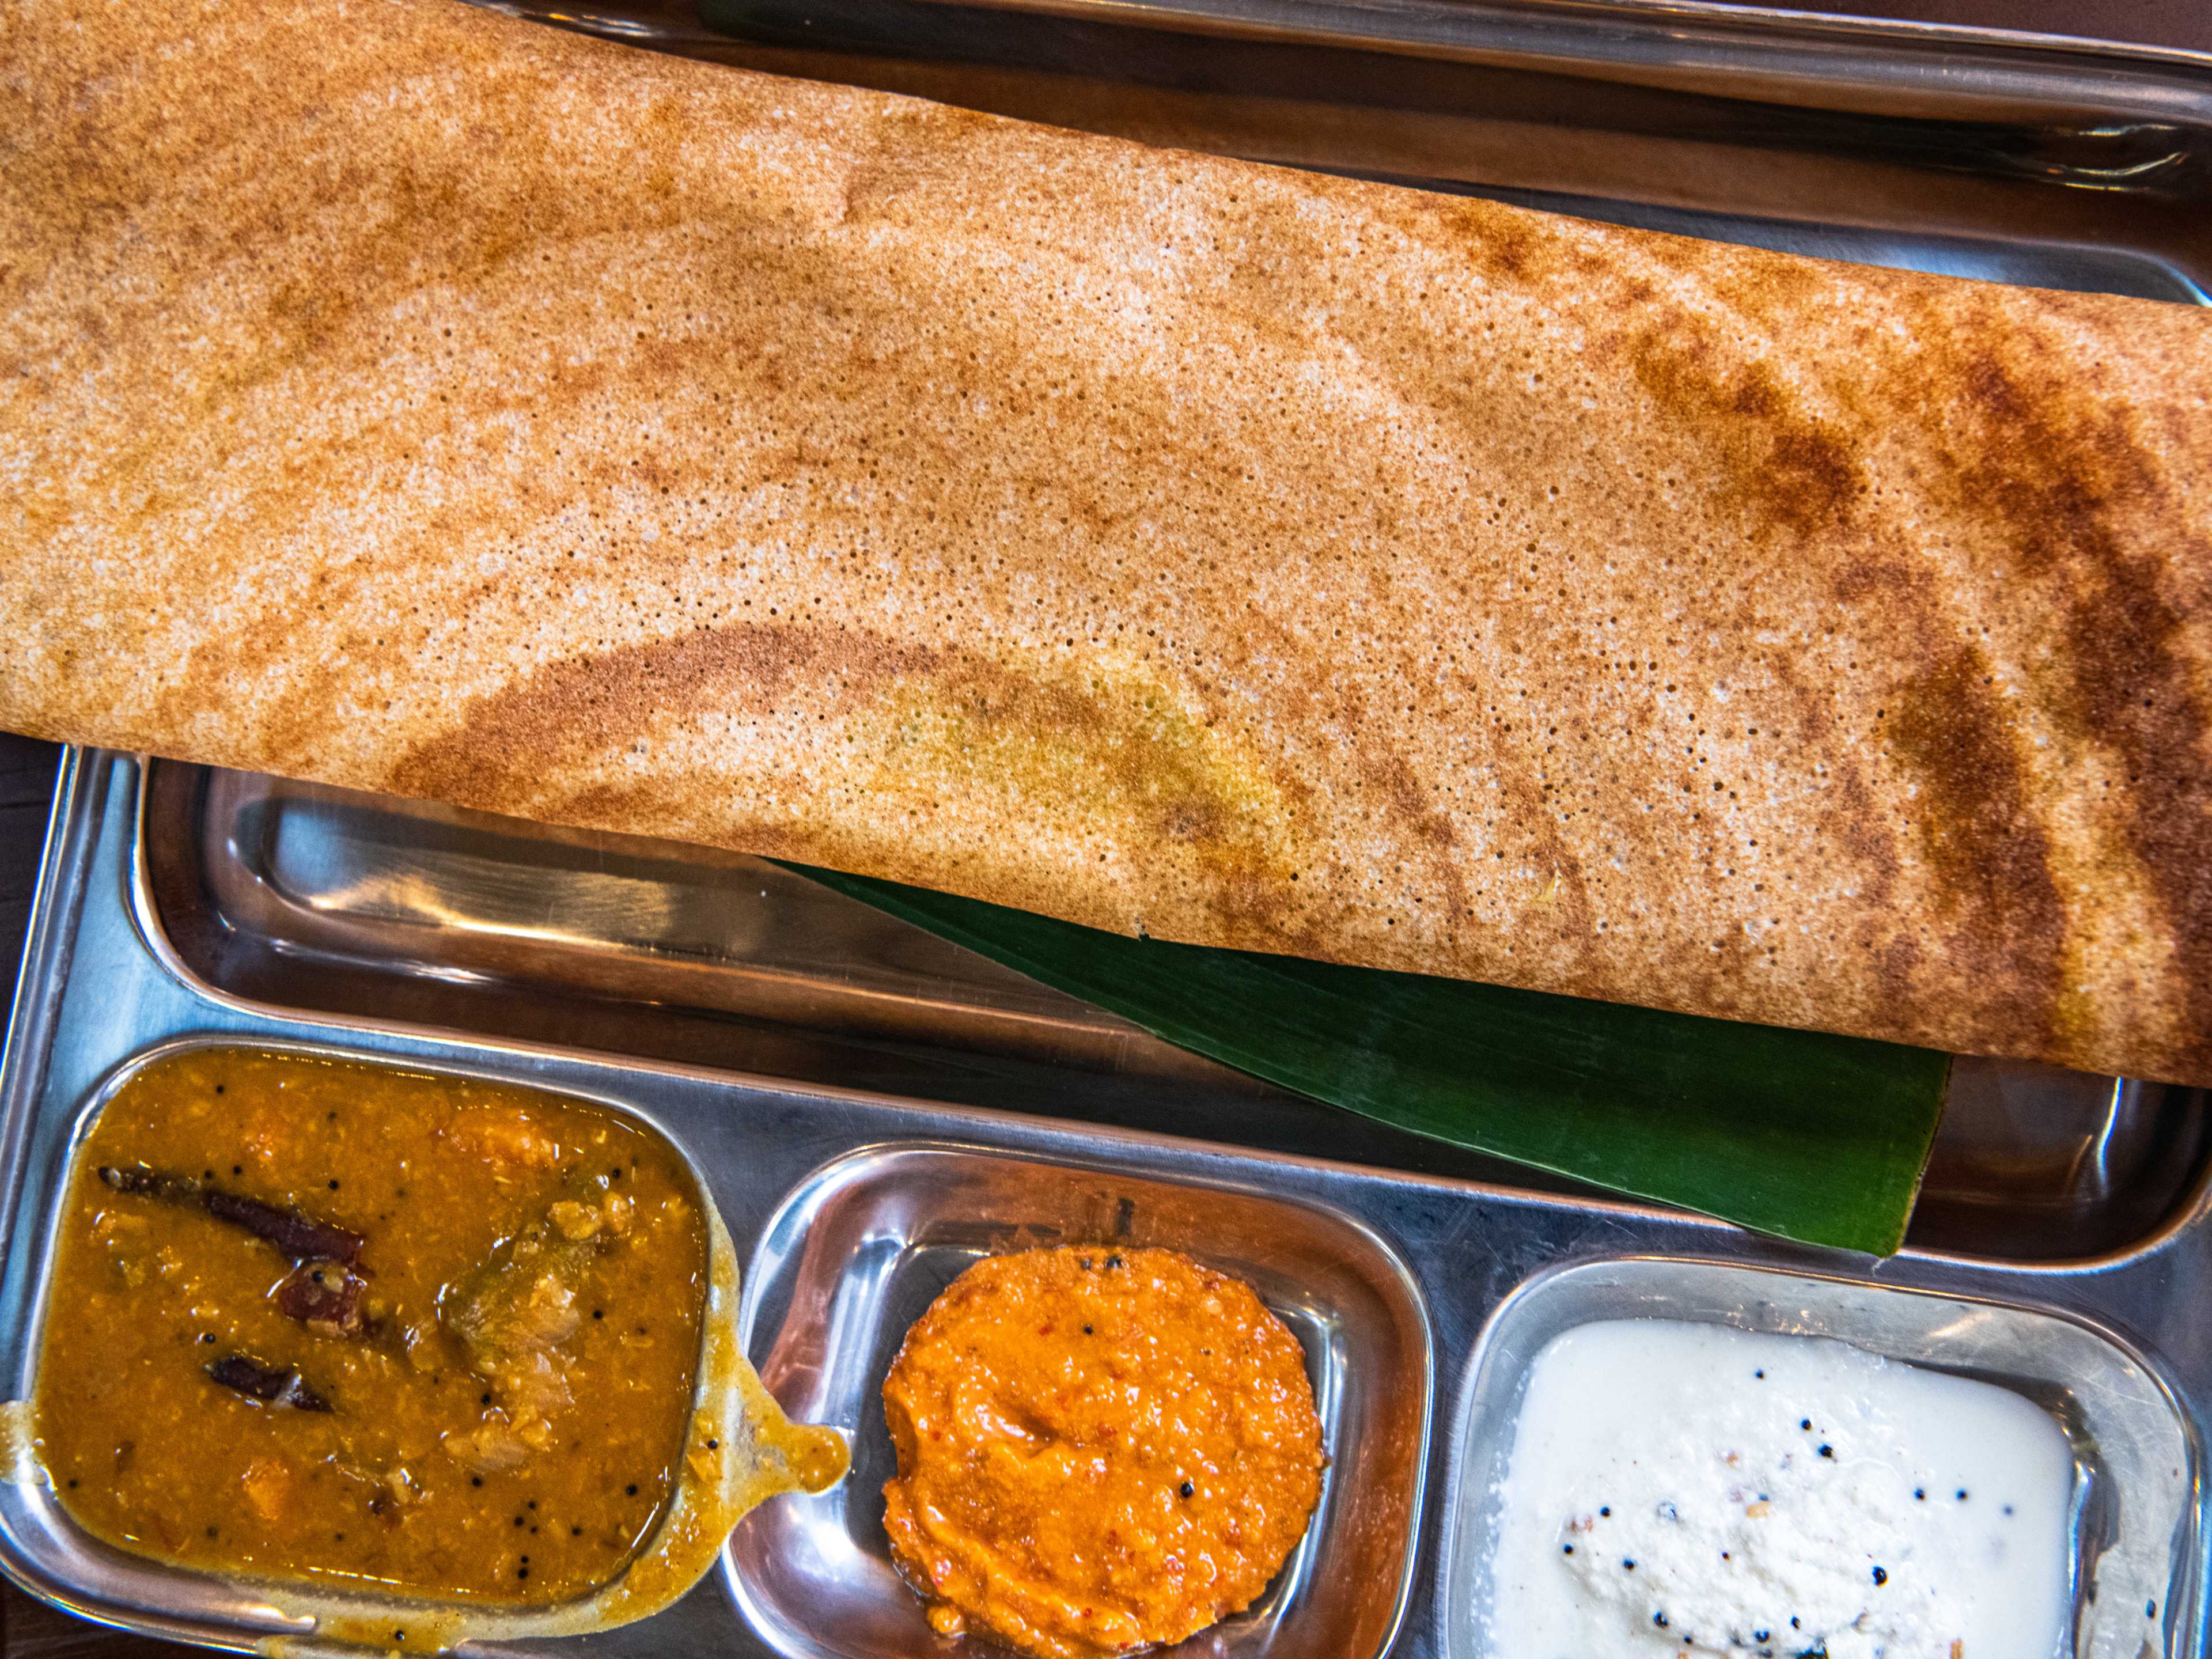 The masala dosa from Hawker's Kitchen.